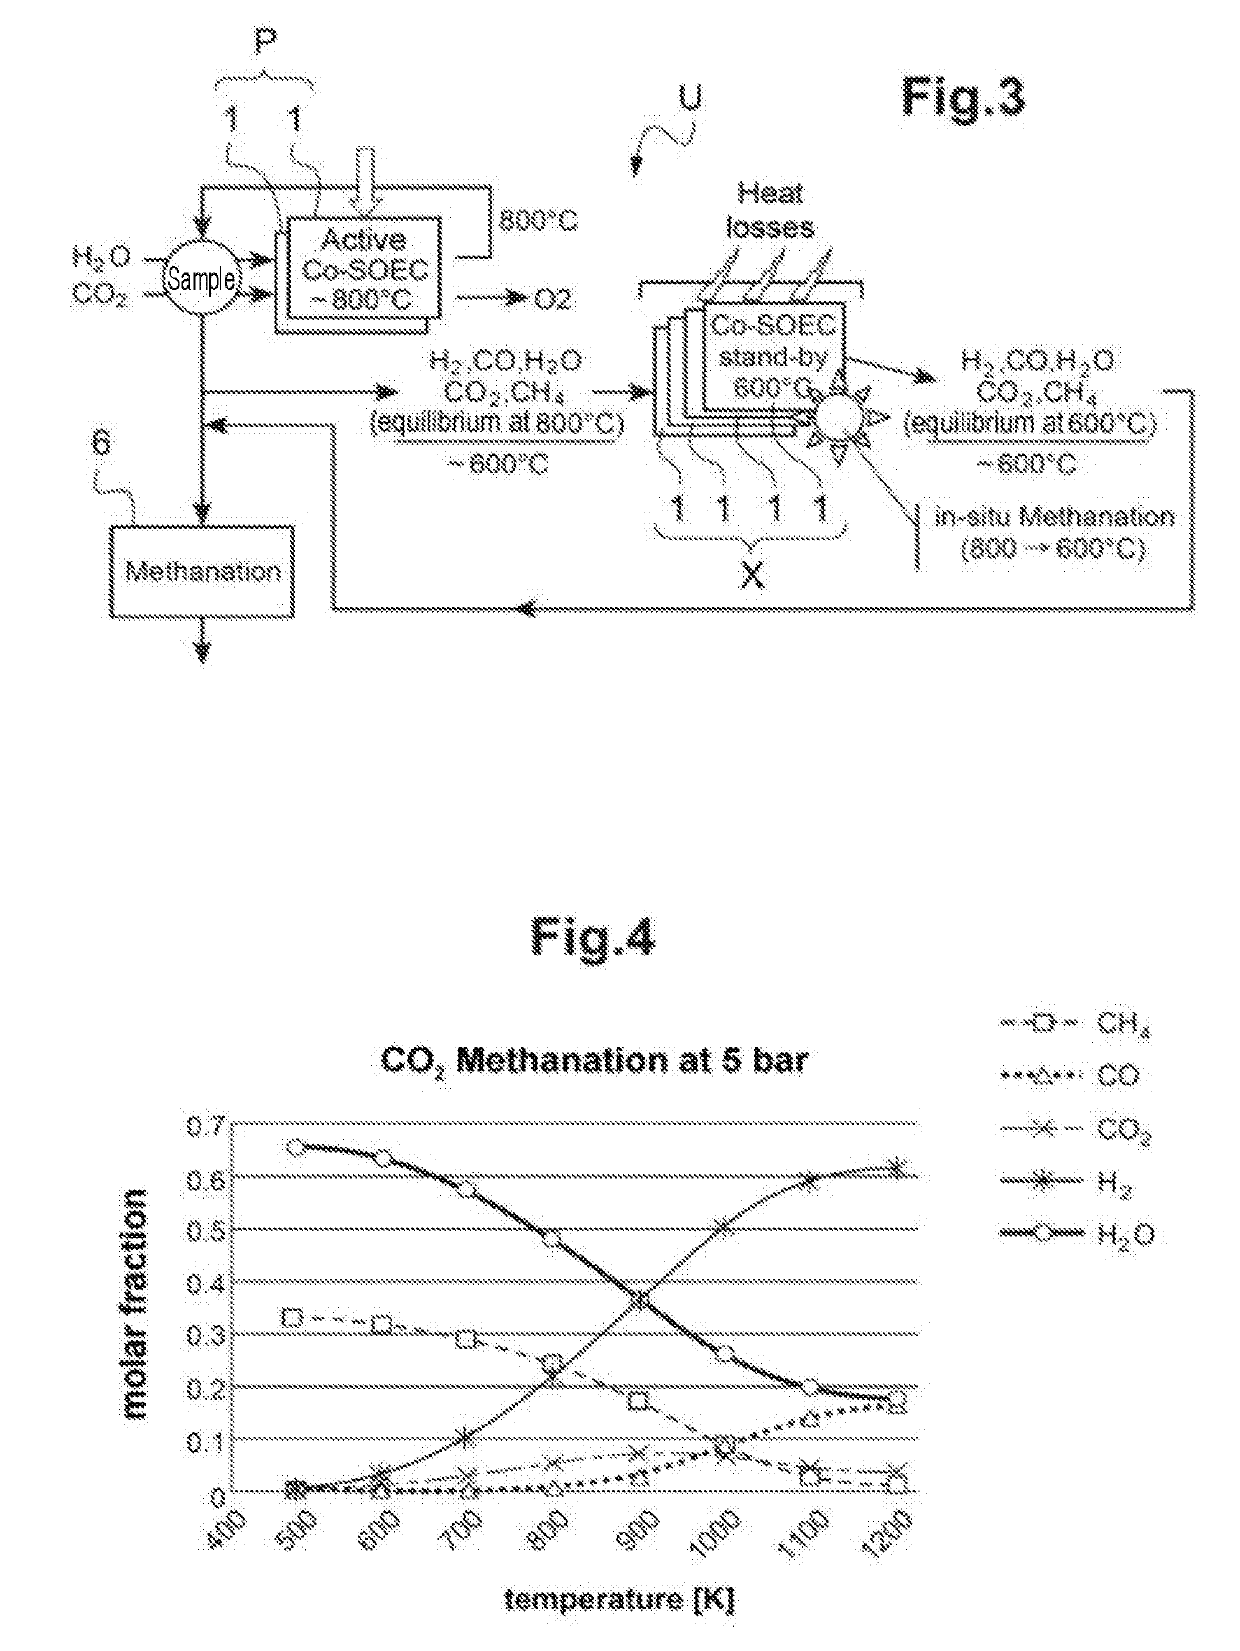 Process for starting mode or stand-by mode operation of a power-to-gas unit comprising a plurality of high-temperature electrolysis (SOEC) or co-electrolysis reactors